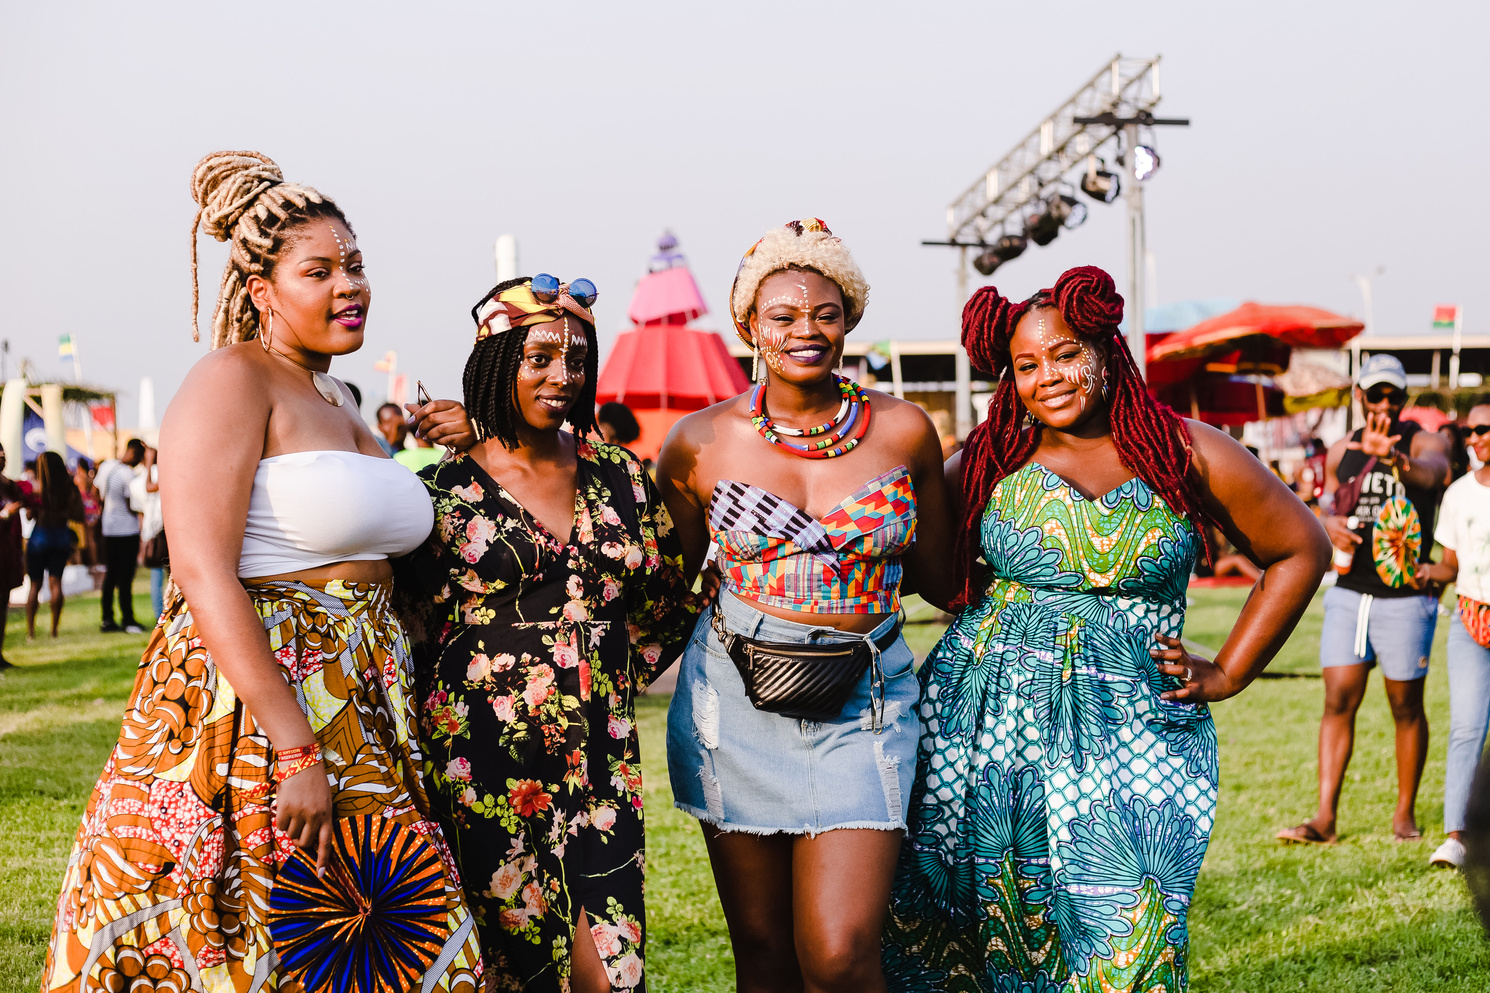 Group of Stylish Women at a Music Festival